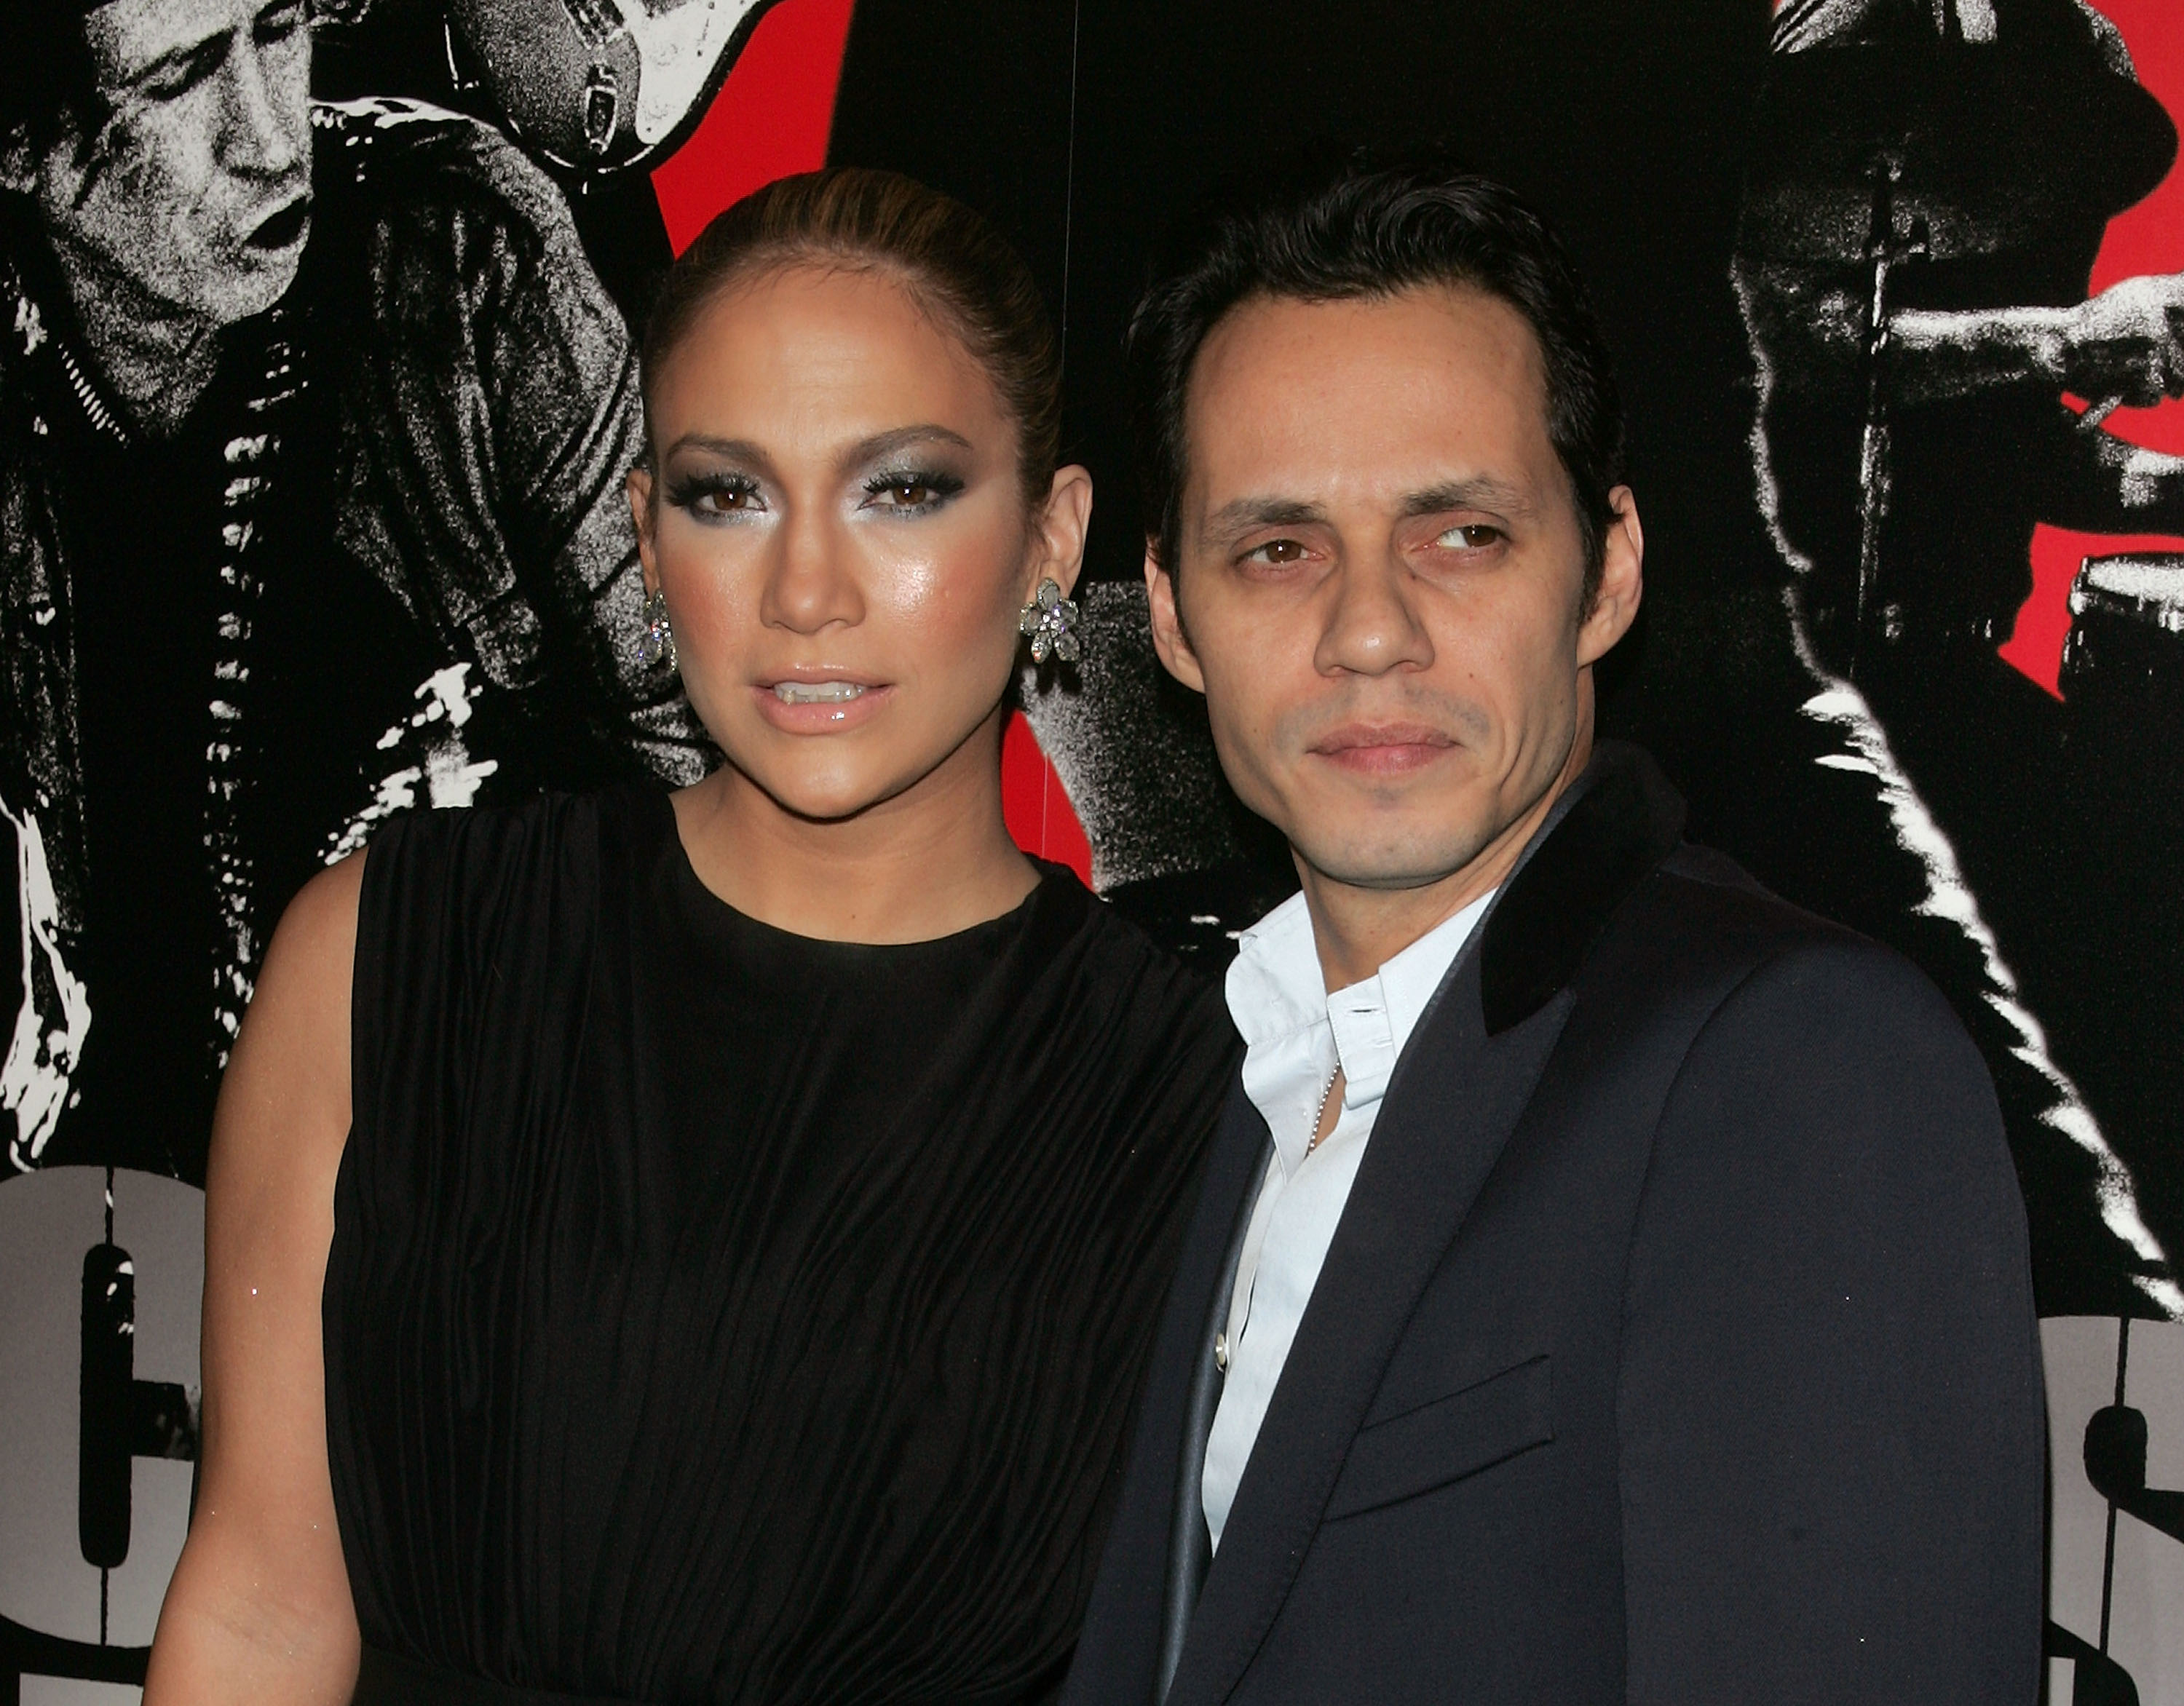 Jennifer Lopez and Musician Marc Anthony in New York, circa 2008 | Source: Getty Images